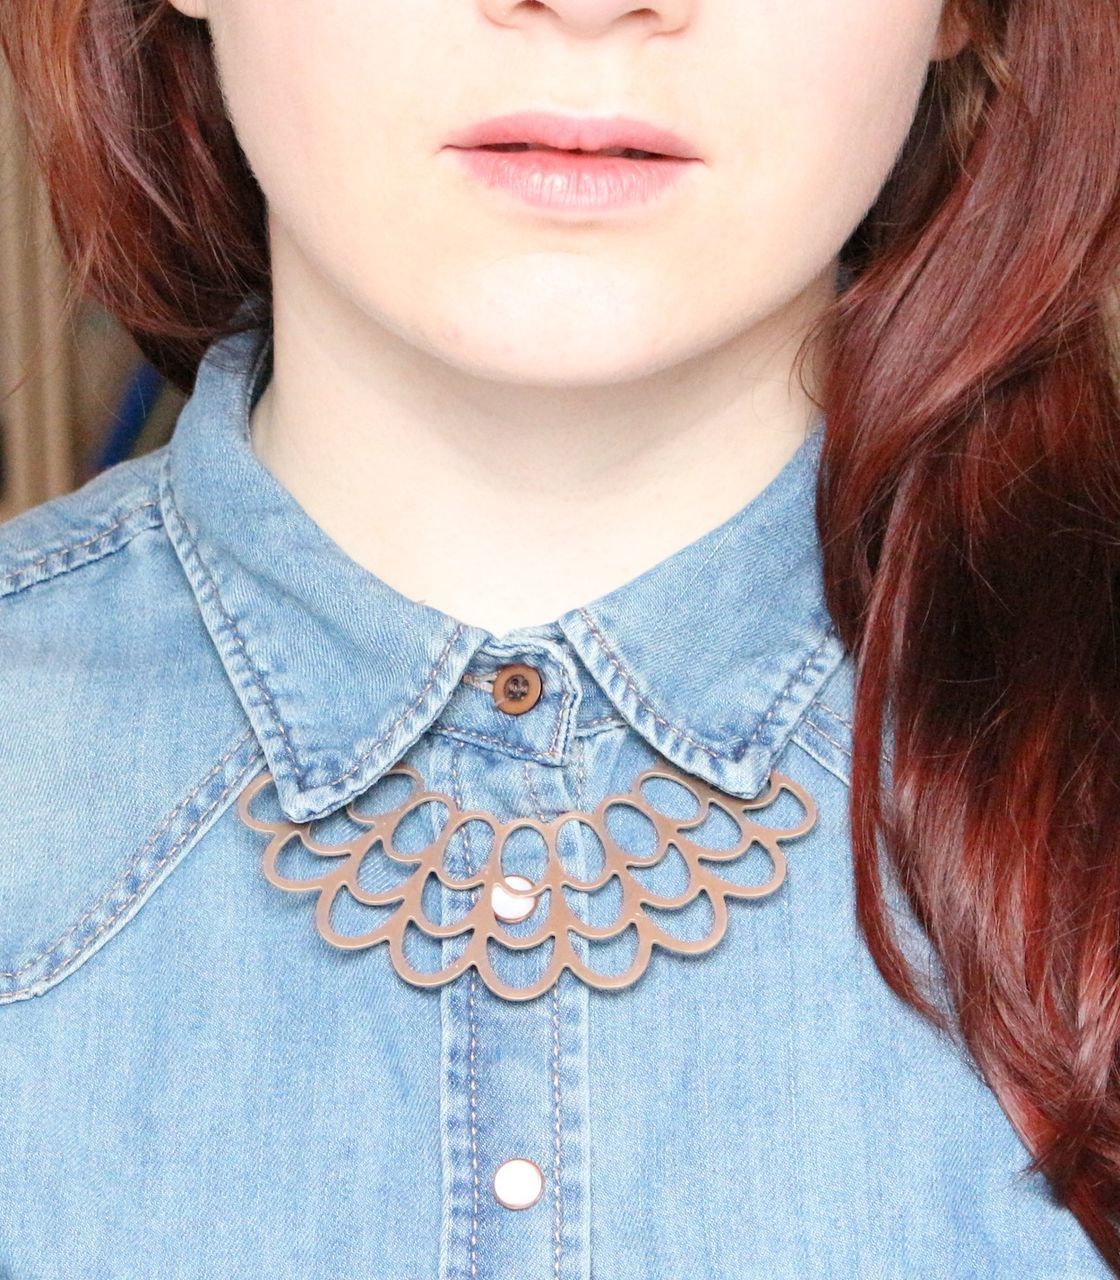 Midsection of redhead woman wearing denim top